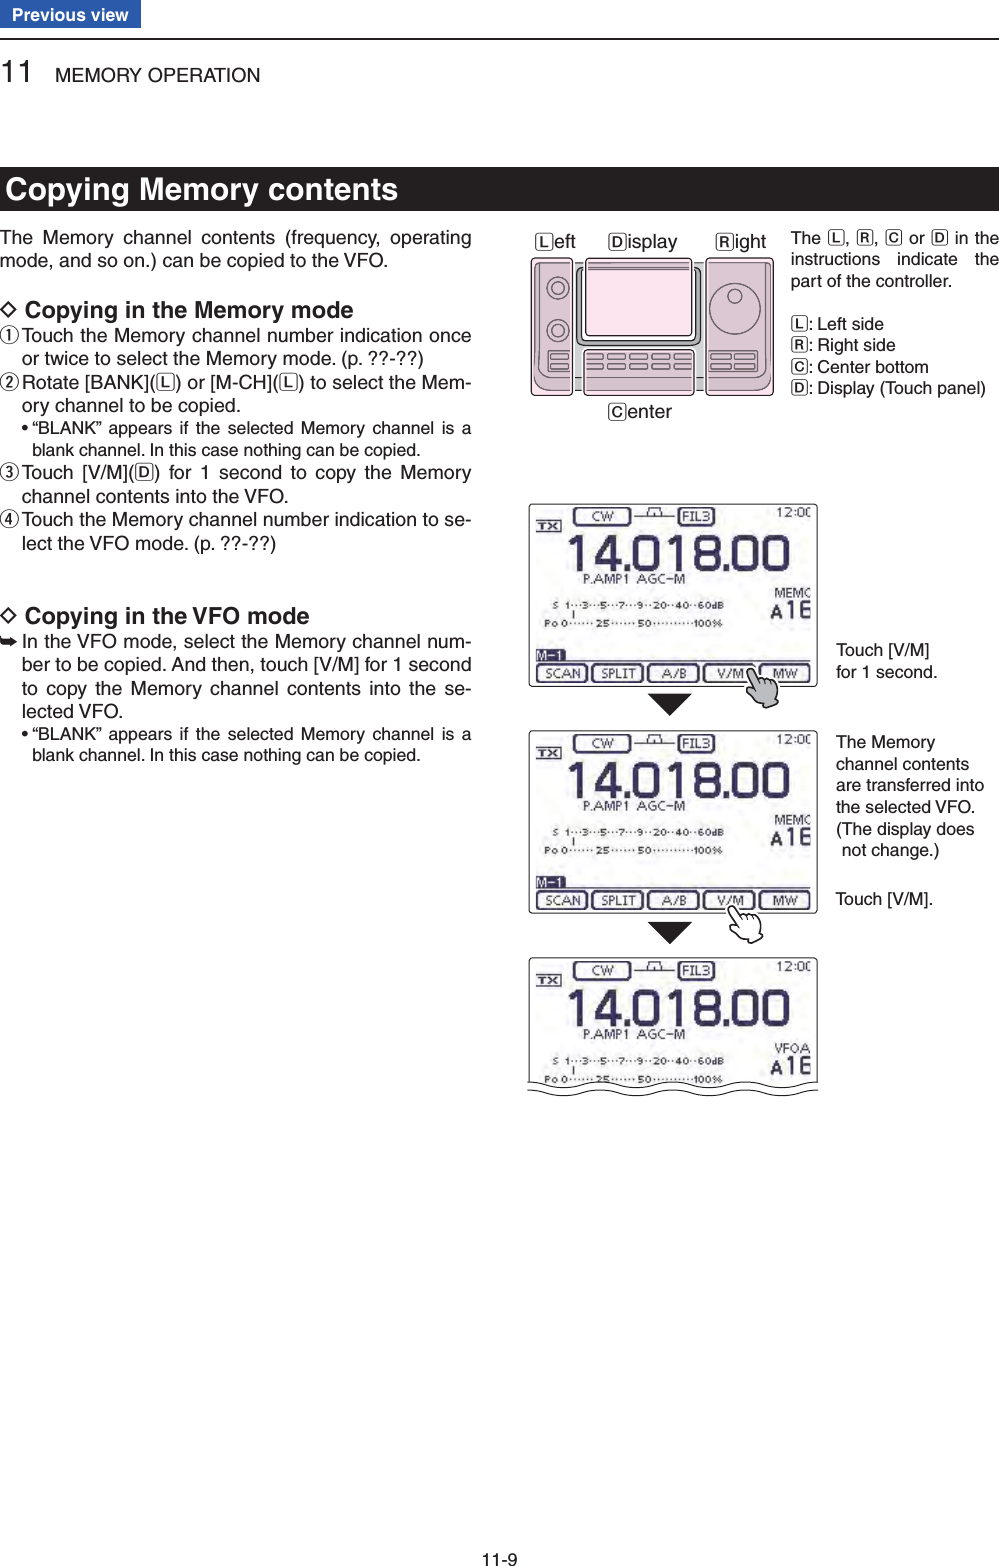 11 MEMORY OPERATION11-9Previous viewThe Memory channel contents (frequency, operating mode, and so on.) can be copied to the VFO.Copying in the Memory mode D Touch the Memory channel number indication once  qor twice to select the Memory mode. (p. ??-??) Rotate [BANK]( wL) or [M-CH](L) to select the Mem-ory channel to be copied. •  “BLANK” appears if the selected Memory channel is a blank channel. In this case nothing can be copied. Touch [V/M]( eD) for 1 second to copy the Memory channel contents into the VFO. Touch the Memory channel number indication to se- rlect the VFO mode. (p. ??-??)Copying in the VFO mode D In the VFO mode, select the Memory channel num- ➥ber to be copied. And then, touch [V/M] for 1 second to copy the Memory channel contents into the se-lected VFO. •  “BLANK” appears if the selected Memory channel is a blank channel. In this case nothing can be copied.Touch [V/M]for 1 second.Touch [V/M].The Memorychannel contents are transferred into the selected VFO.( The display does not change.)Copying Memory contentsThe L, R, C or D in the instructions indicate the part of the controller.L: Left sideR: Right sideC: Center bottomD: Display (Touch panel)Left RightCenterDisplay